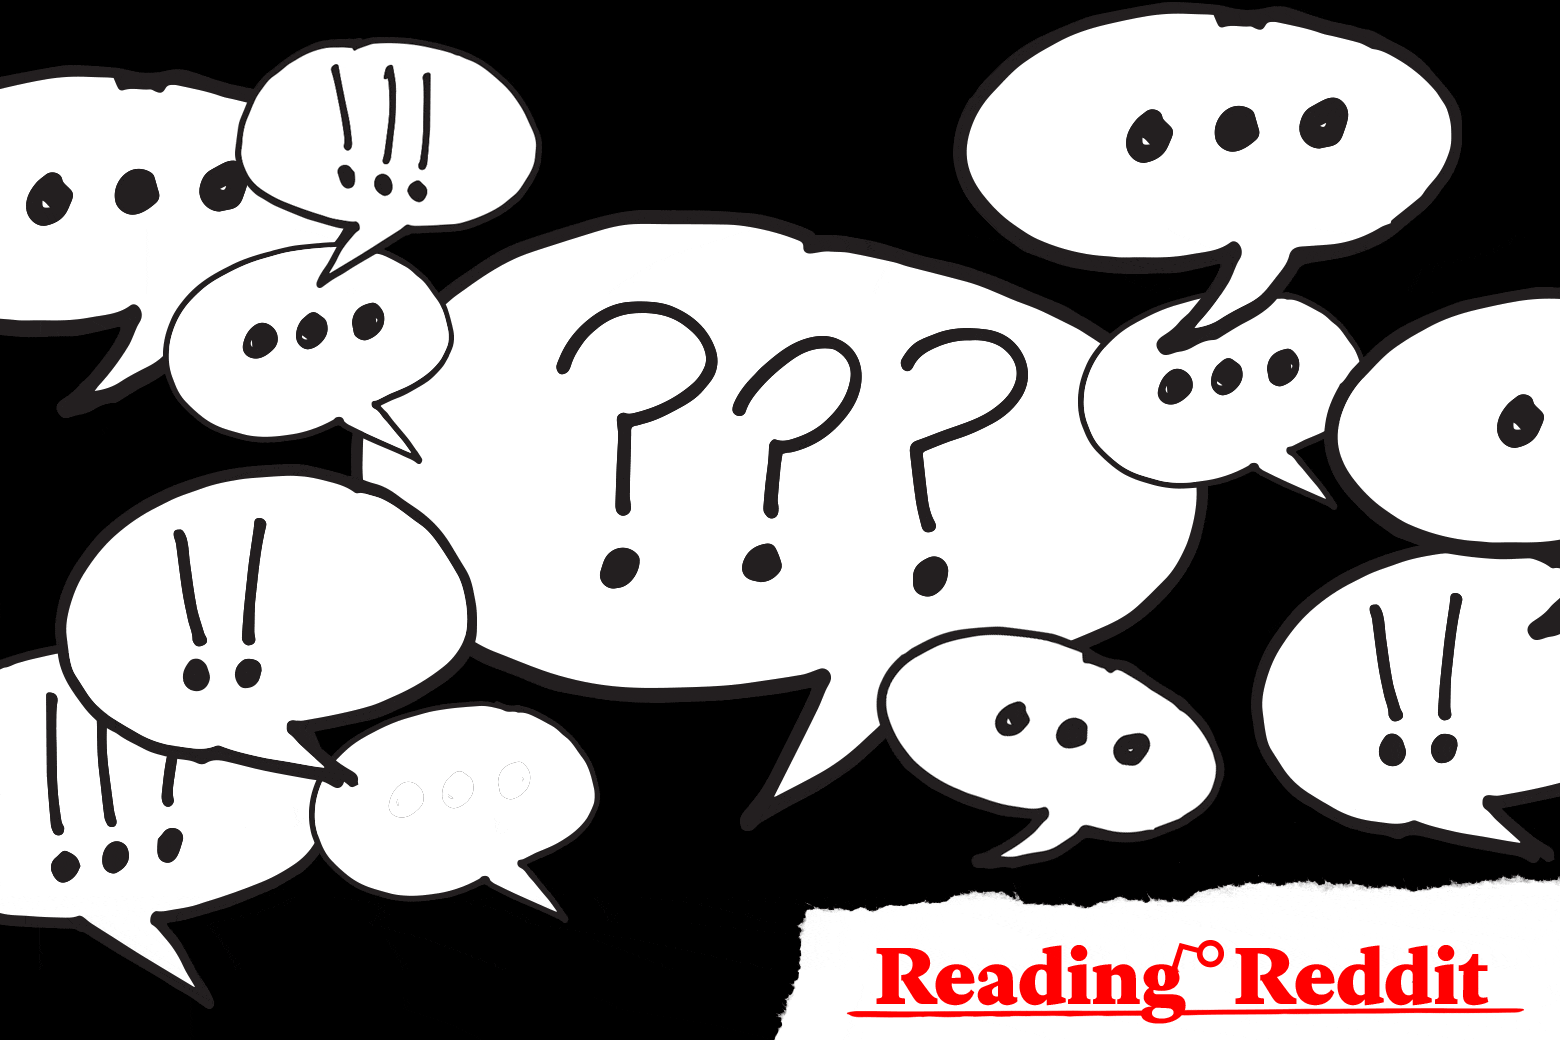 One speech bubble with question marks surrounded by other speech bubbles with exclamation points, and ellipses.